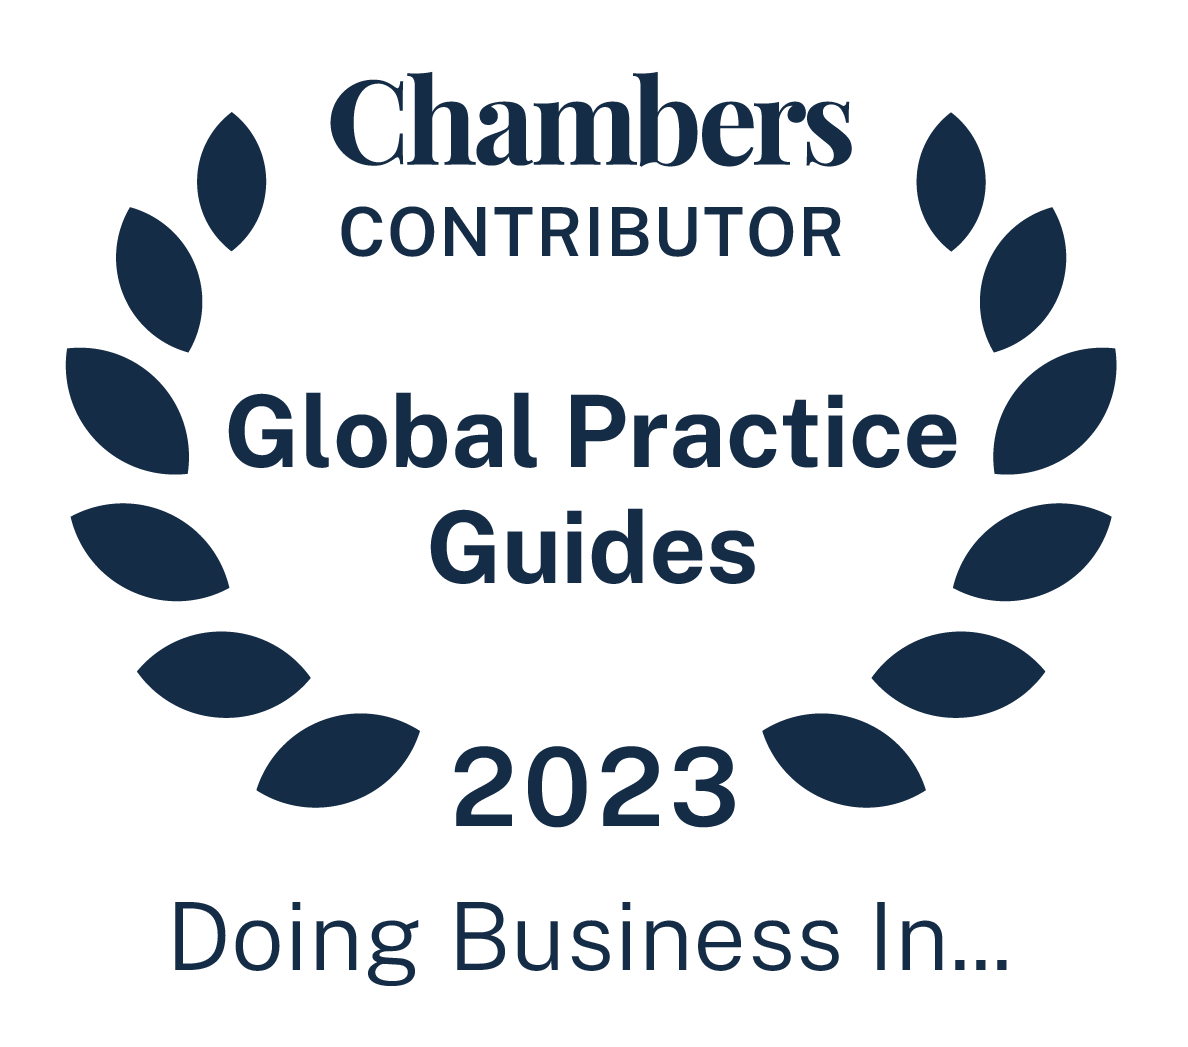 Chambers_GPG_DOING BUSINESS IN_Contributor_Badge_2023.png